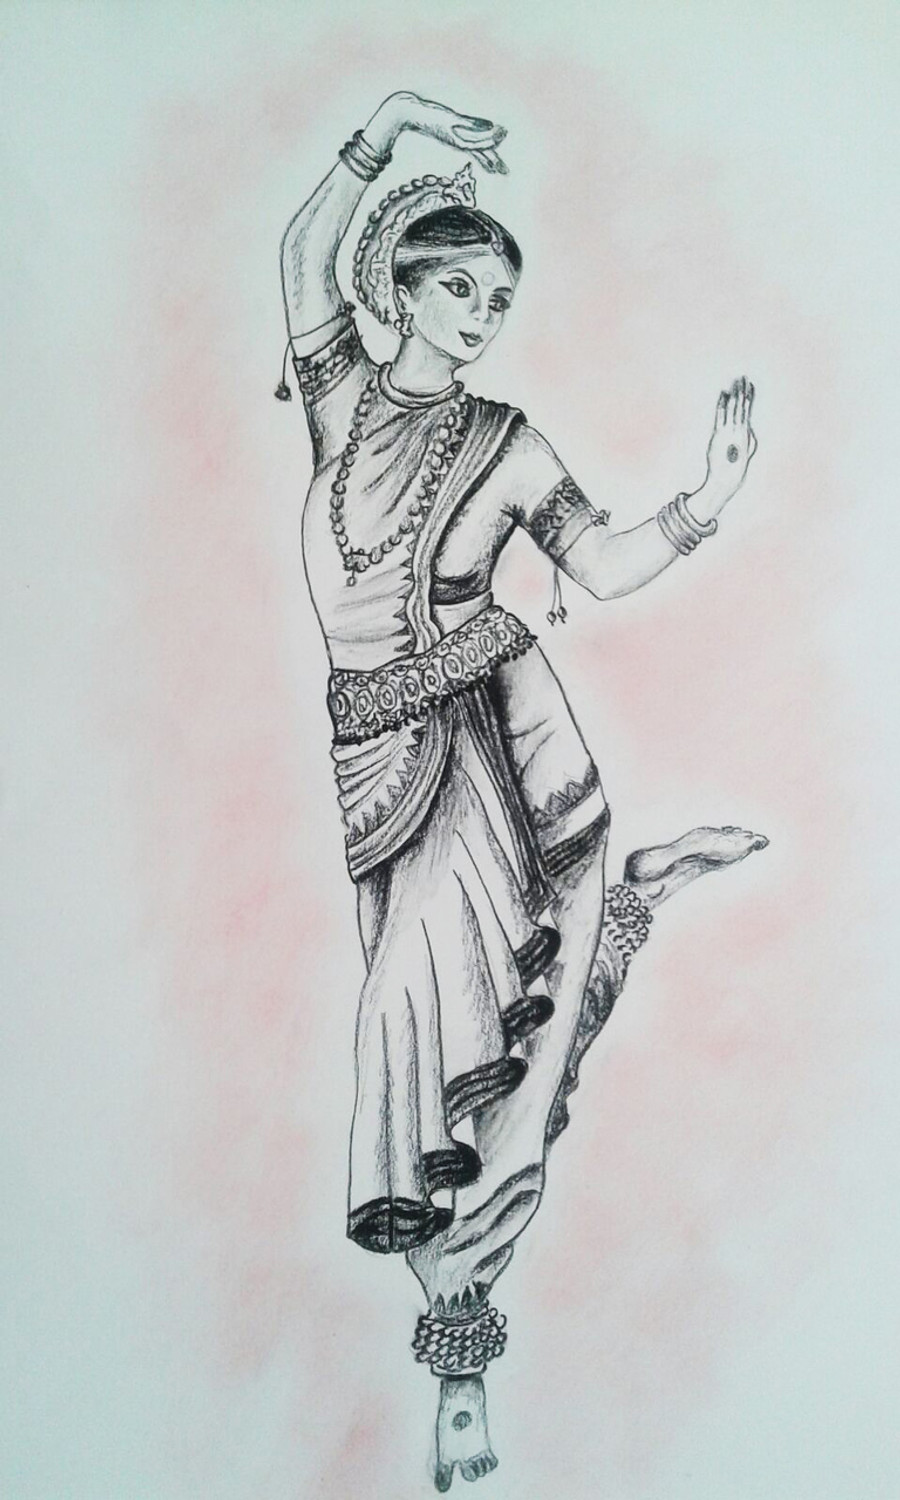 How to draw a boy dancing bharatanatyam || pencil drawing easy step by step  - YouTube